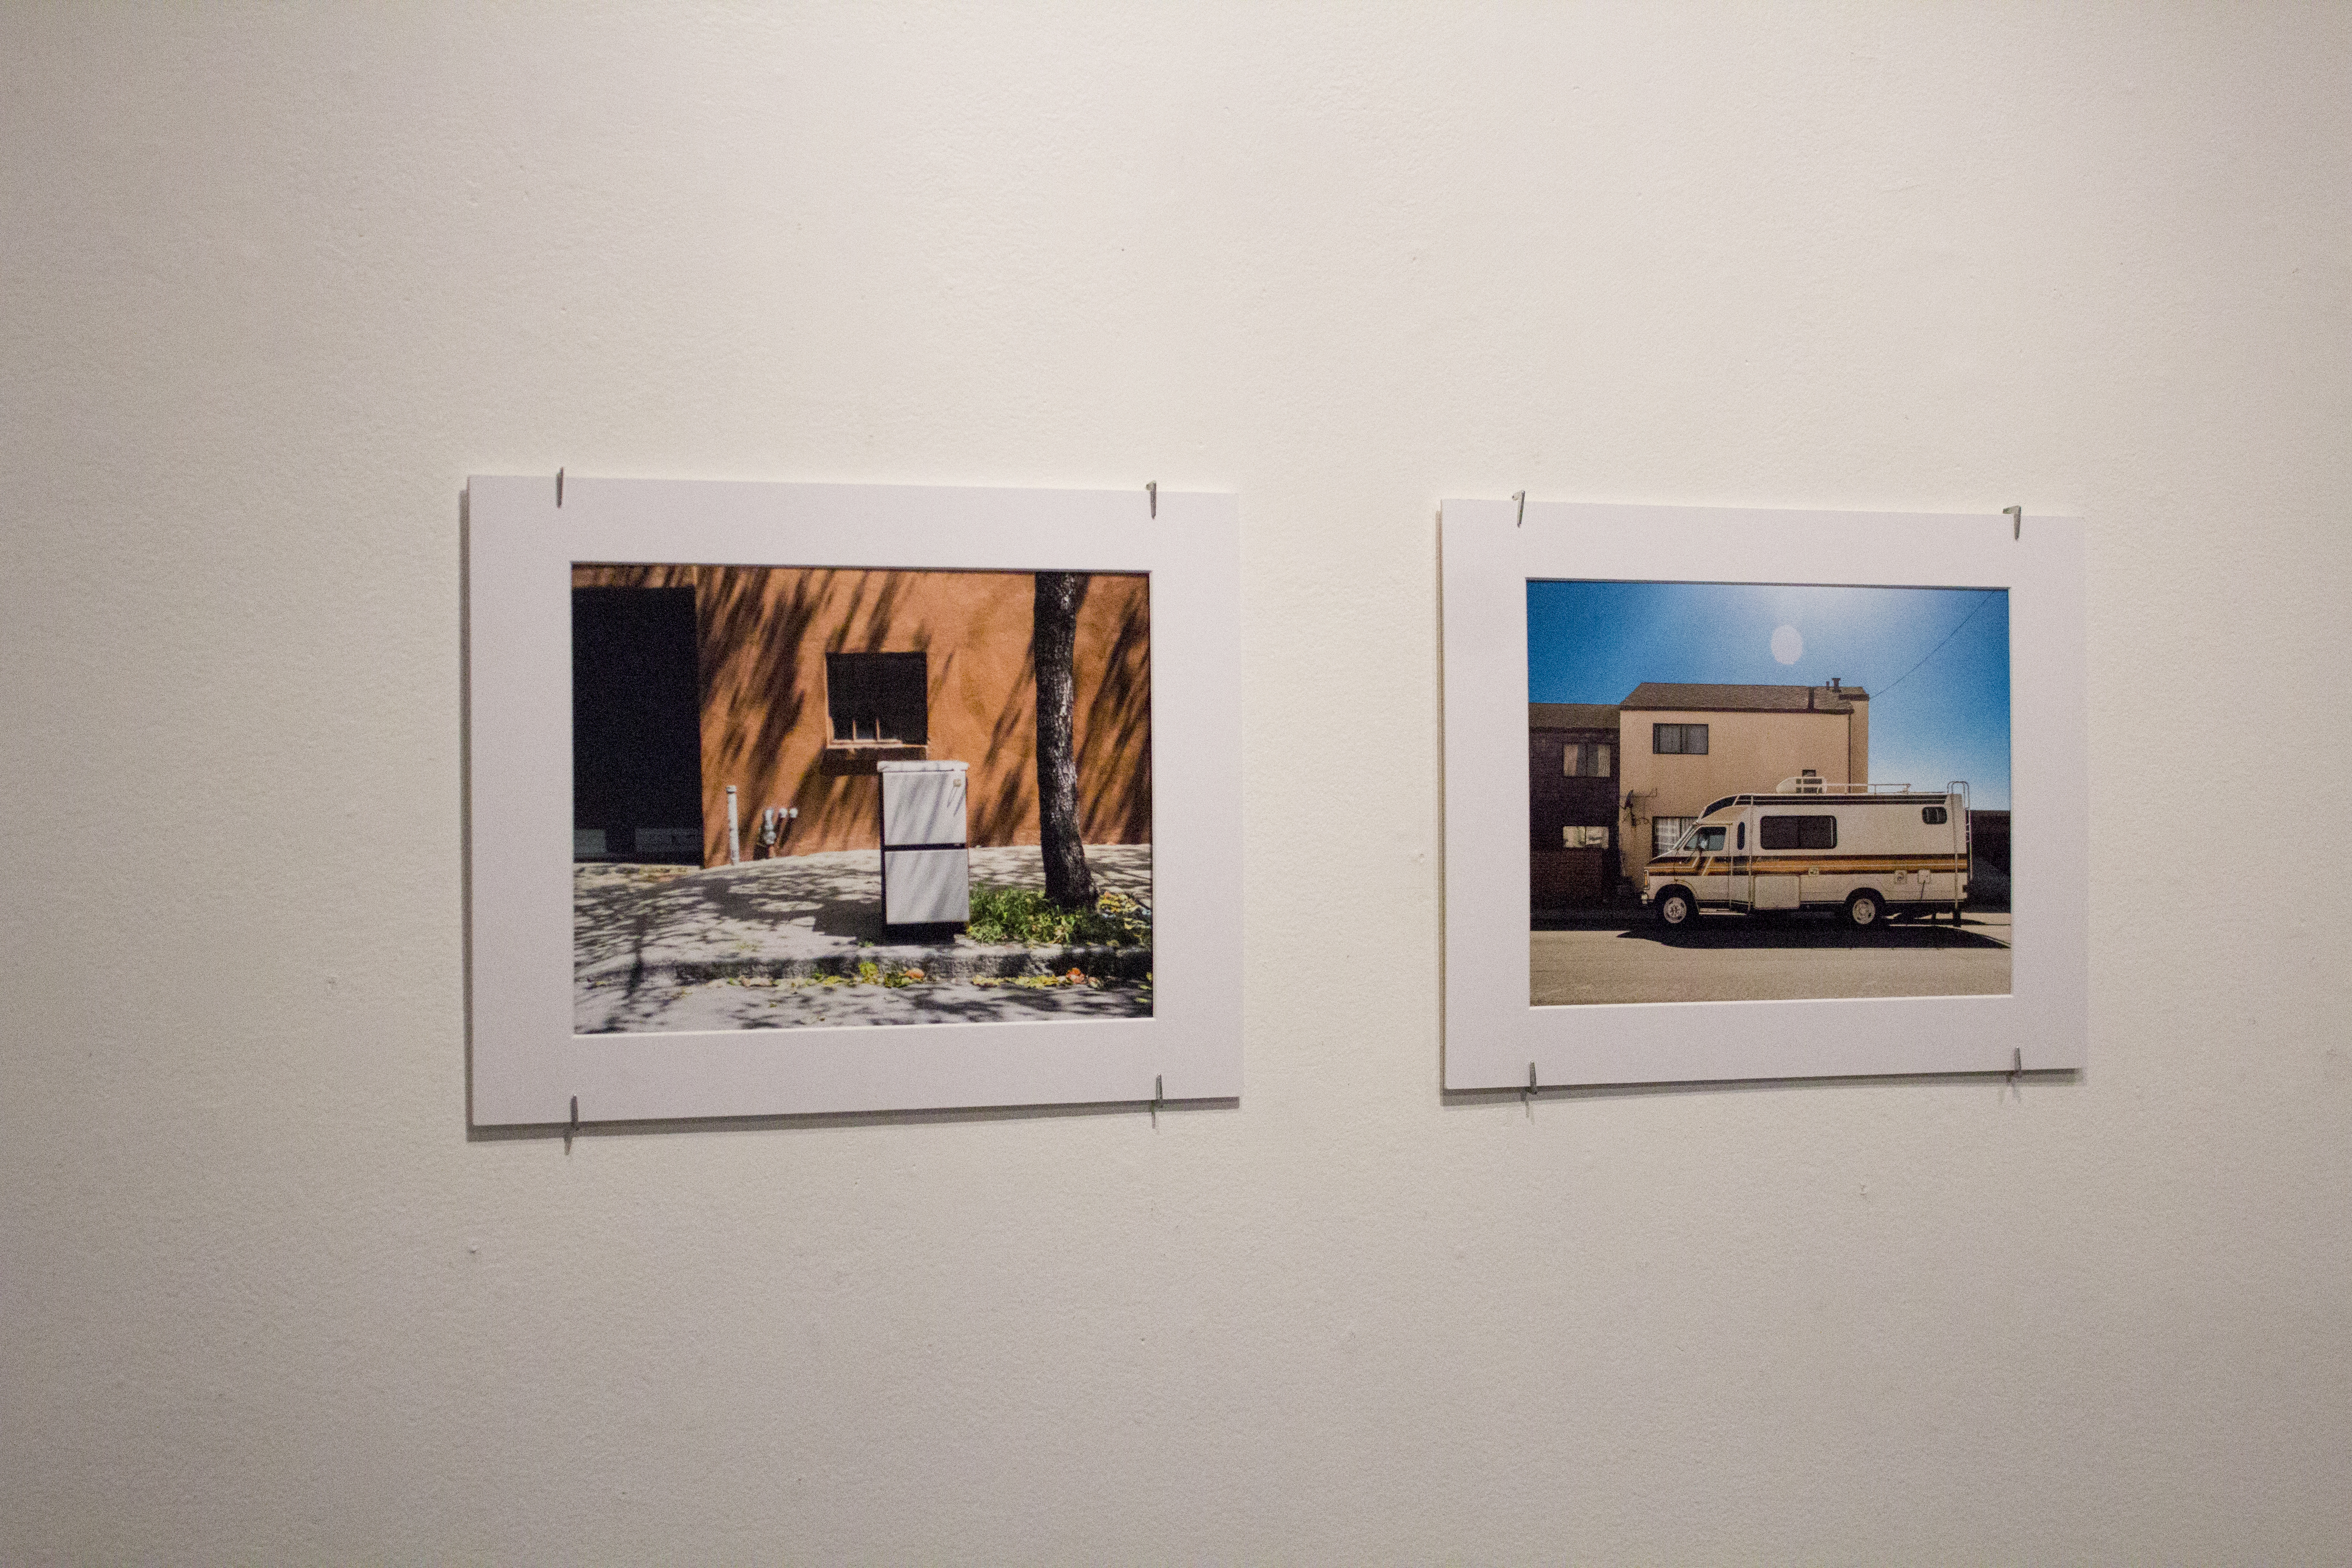 Images from photography student Erhan Erdem's photo exhibit Here , for Now showcase abandoned furniture and RV's temporarily parked on the sidewalks of San Francisco. The photo exhibit will be open to the public through Oct. 29, 2018 at the photography department. Photo by Peter J. Suter/The Guardsman